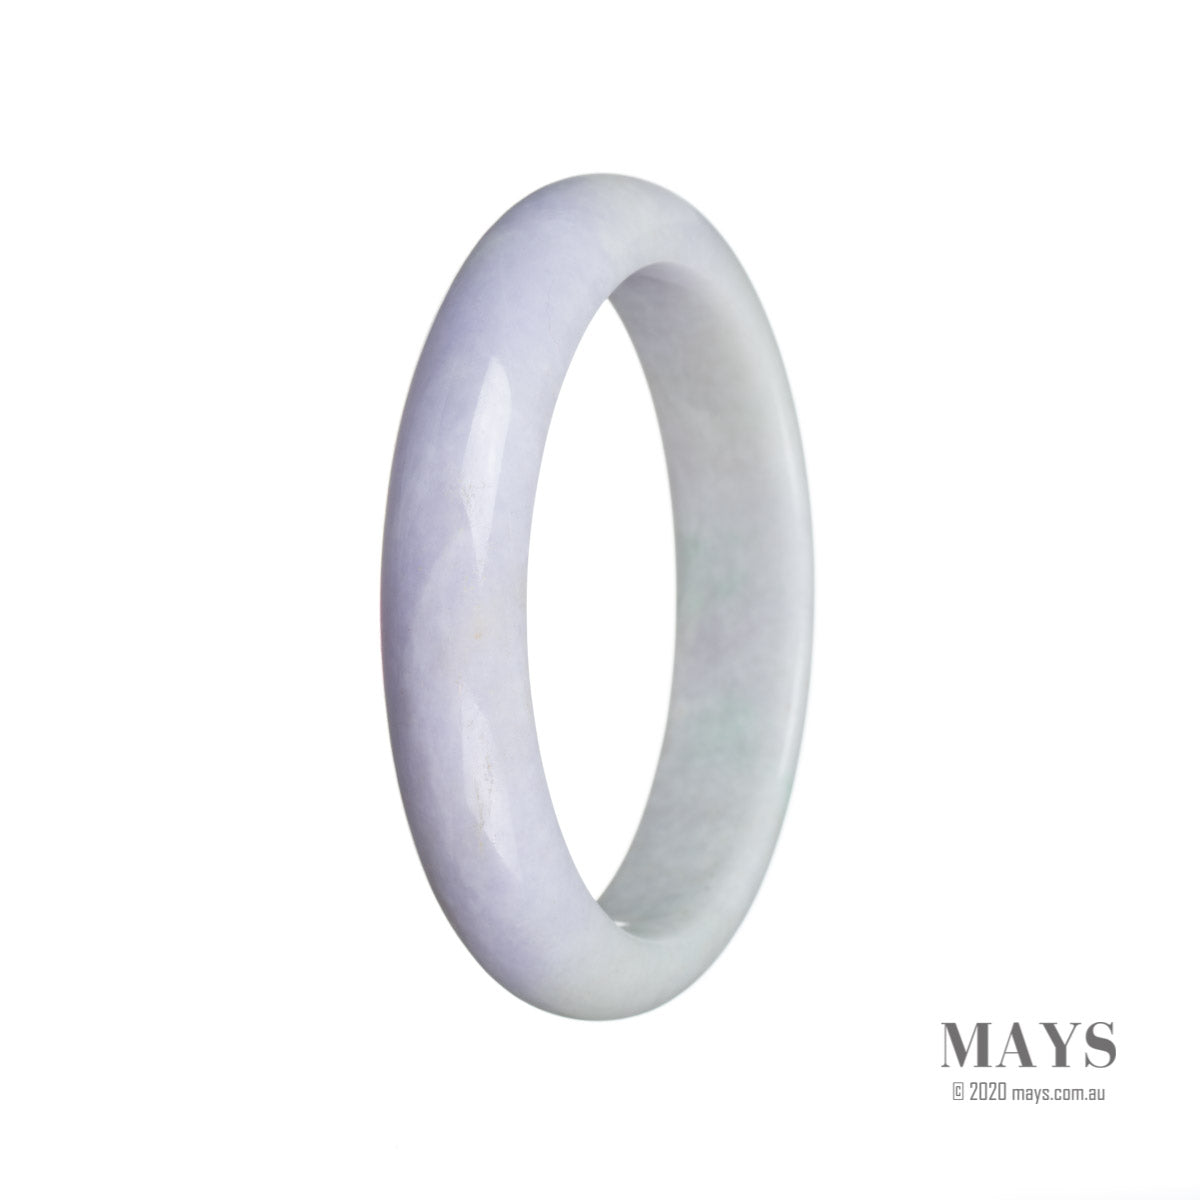 A close-up image of a lavender-colored jade bracelet with a smooth semi-round shape.